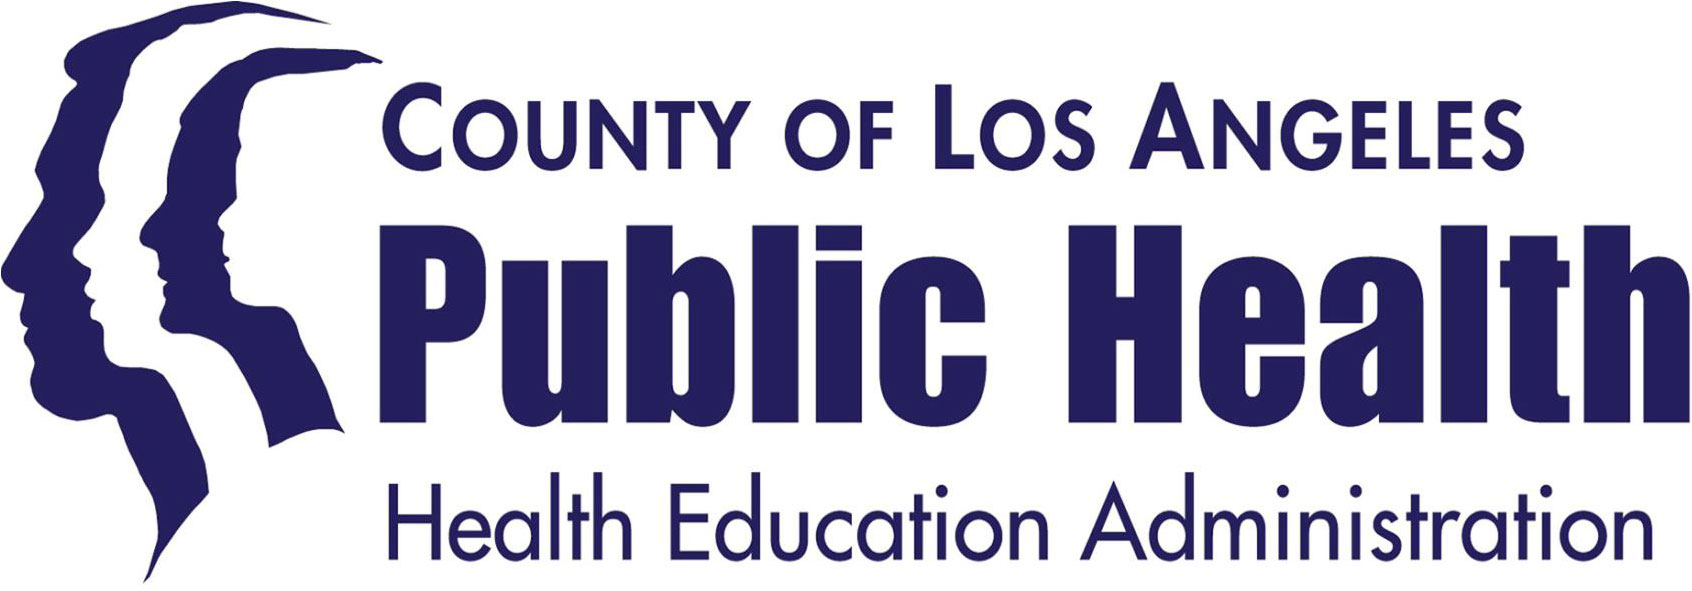 County of Los Angeles Department of Public Health Logo.